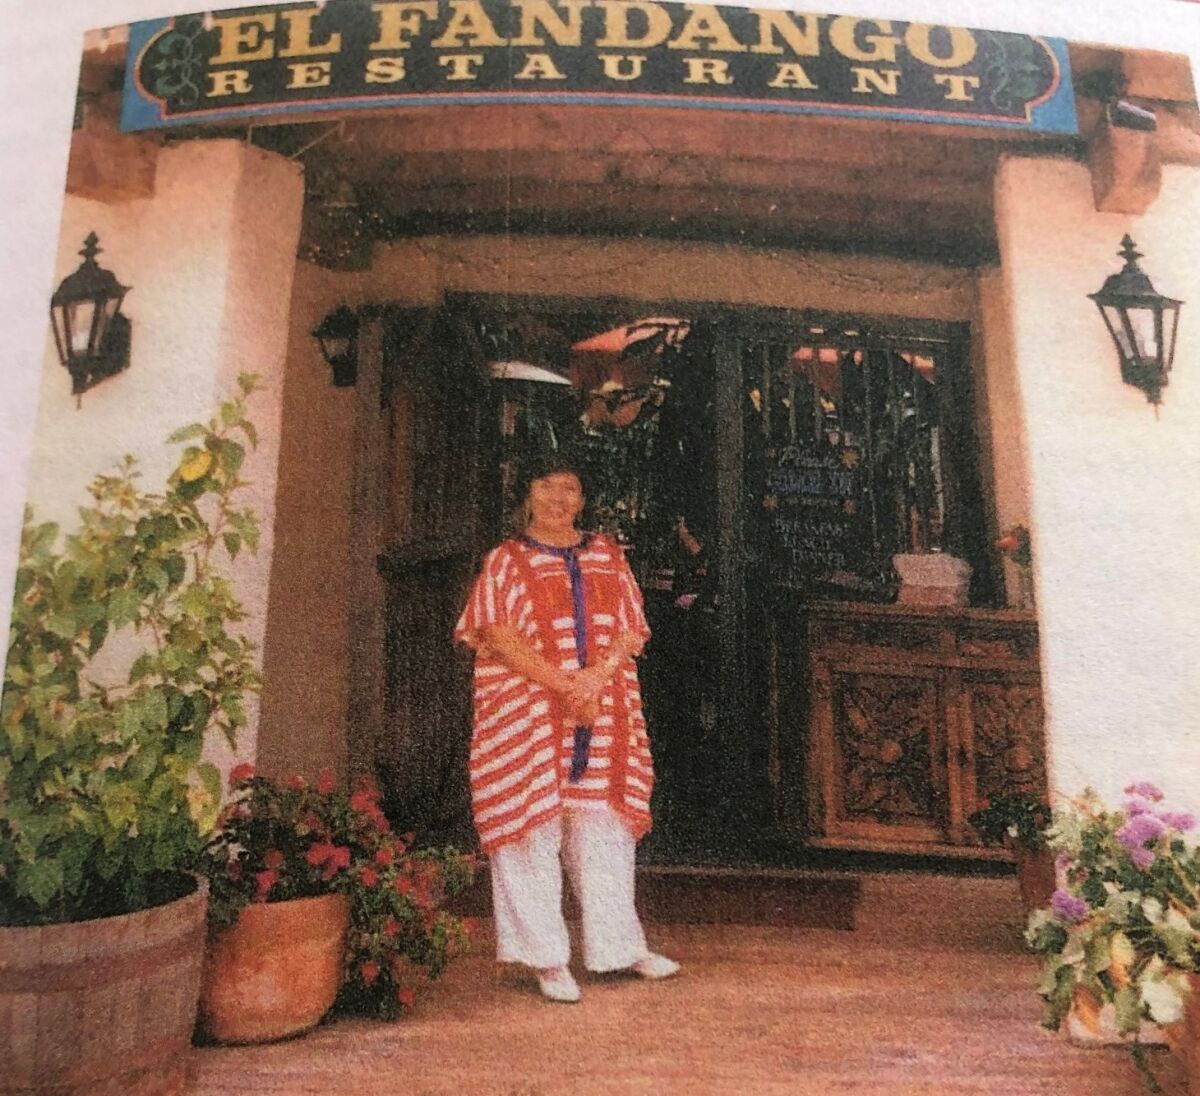 Consuelo "Connie" Puente Miller photographed in front of her El Fandango Restaurant in Old Town, which closed in 2013.